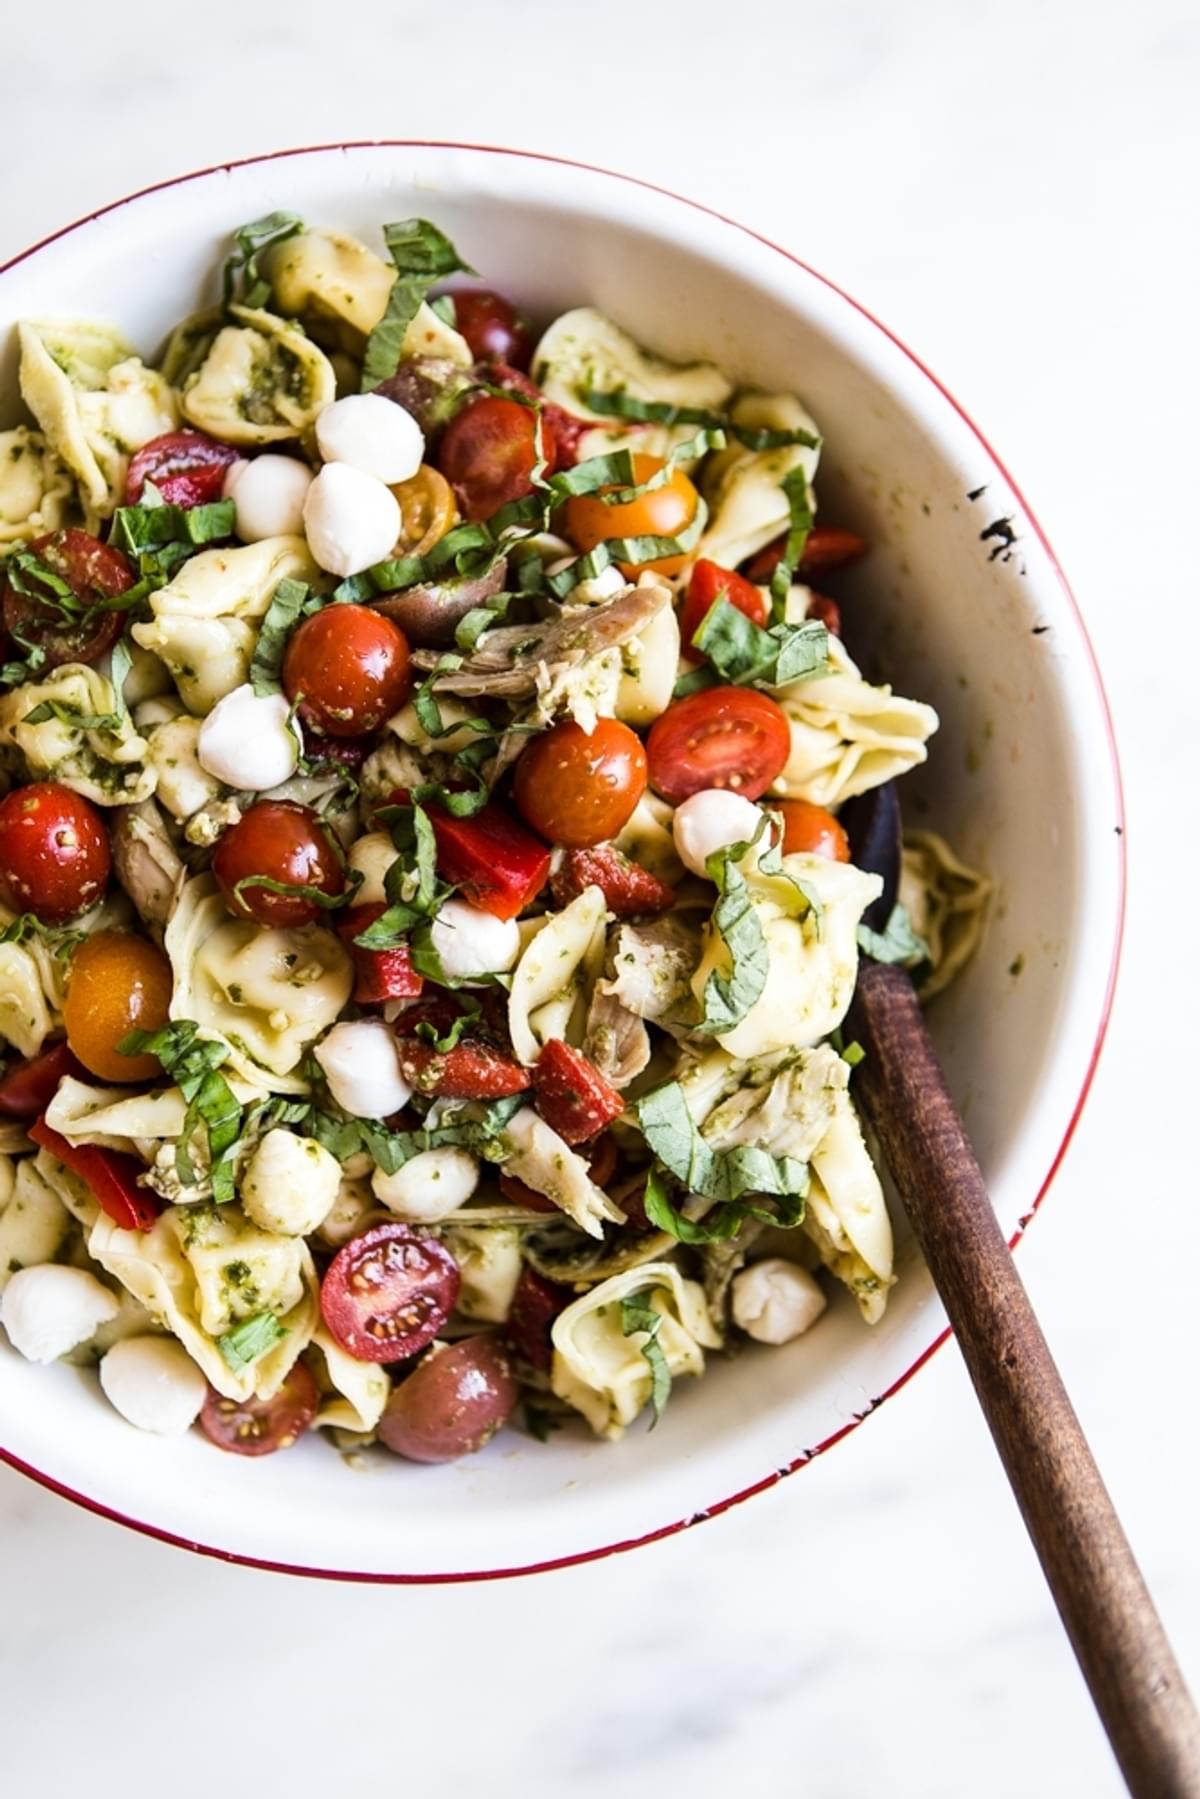 Tortellini pasta salad in a bowl with tomatoes, basil, and mozzarella